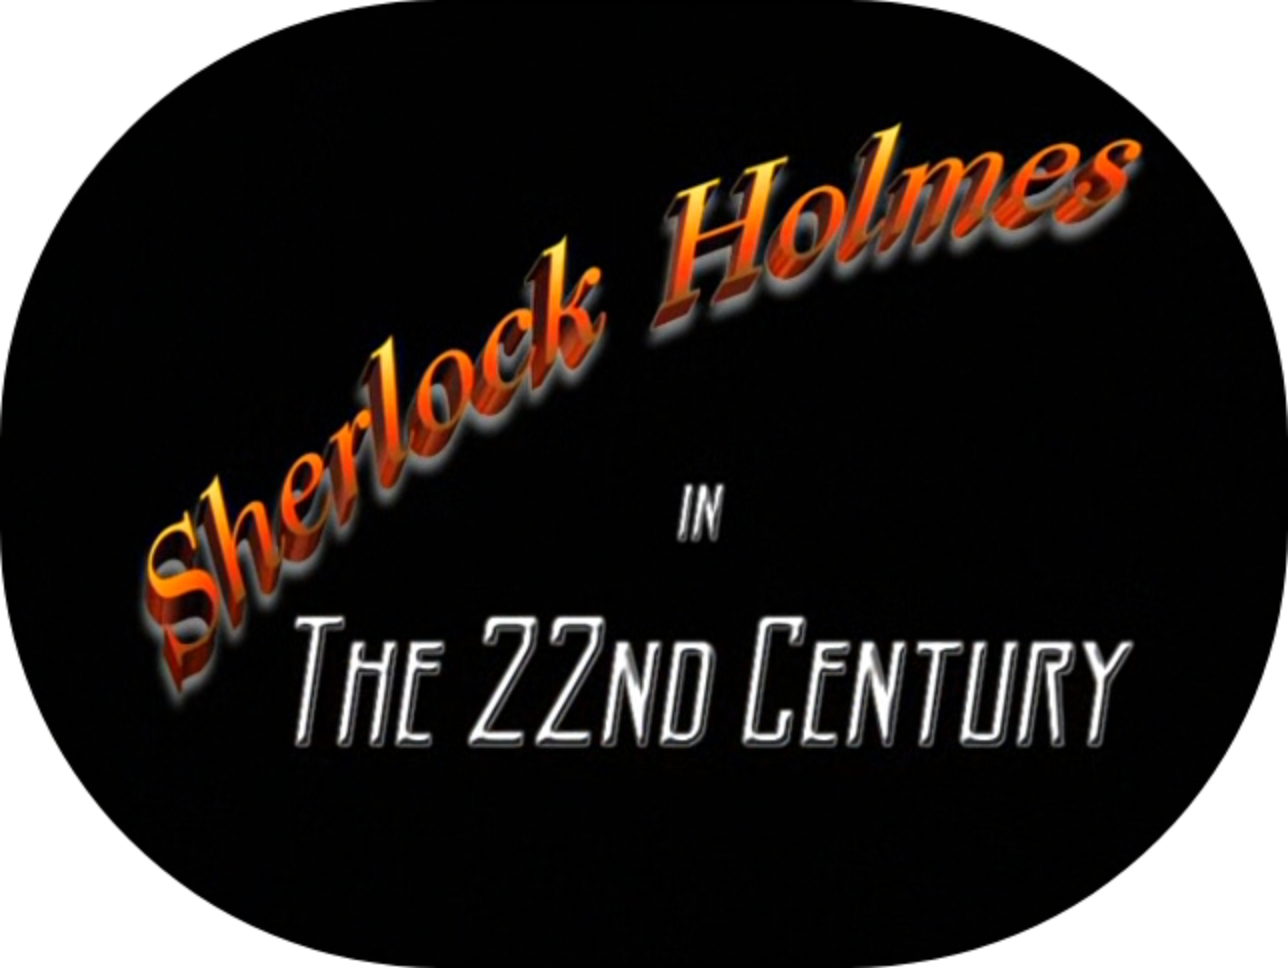 Sherlock Holmes in the 22nd Century (3 DVDs Box Set)